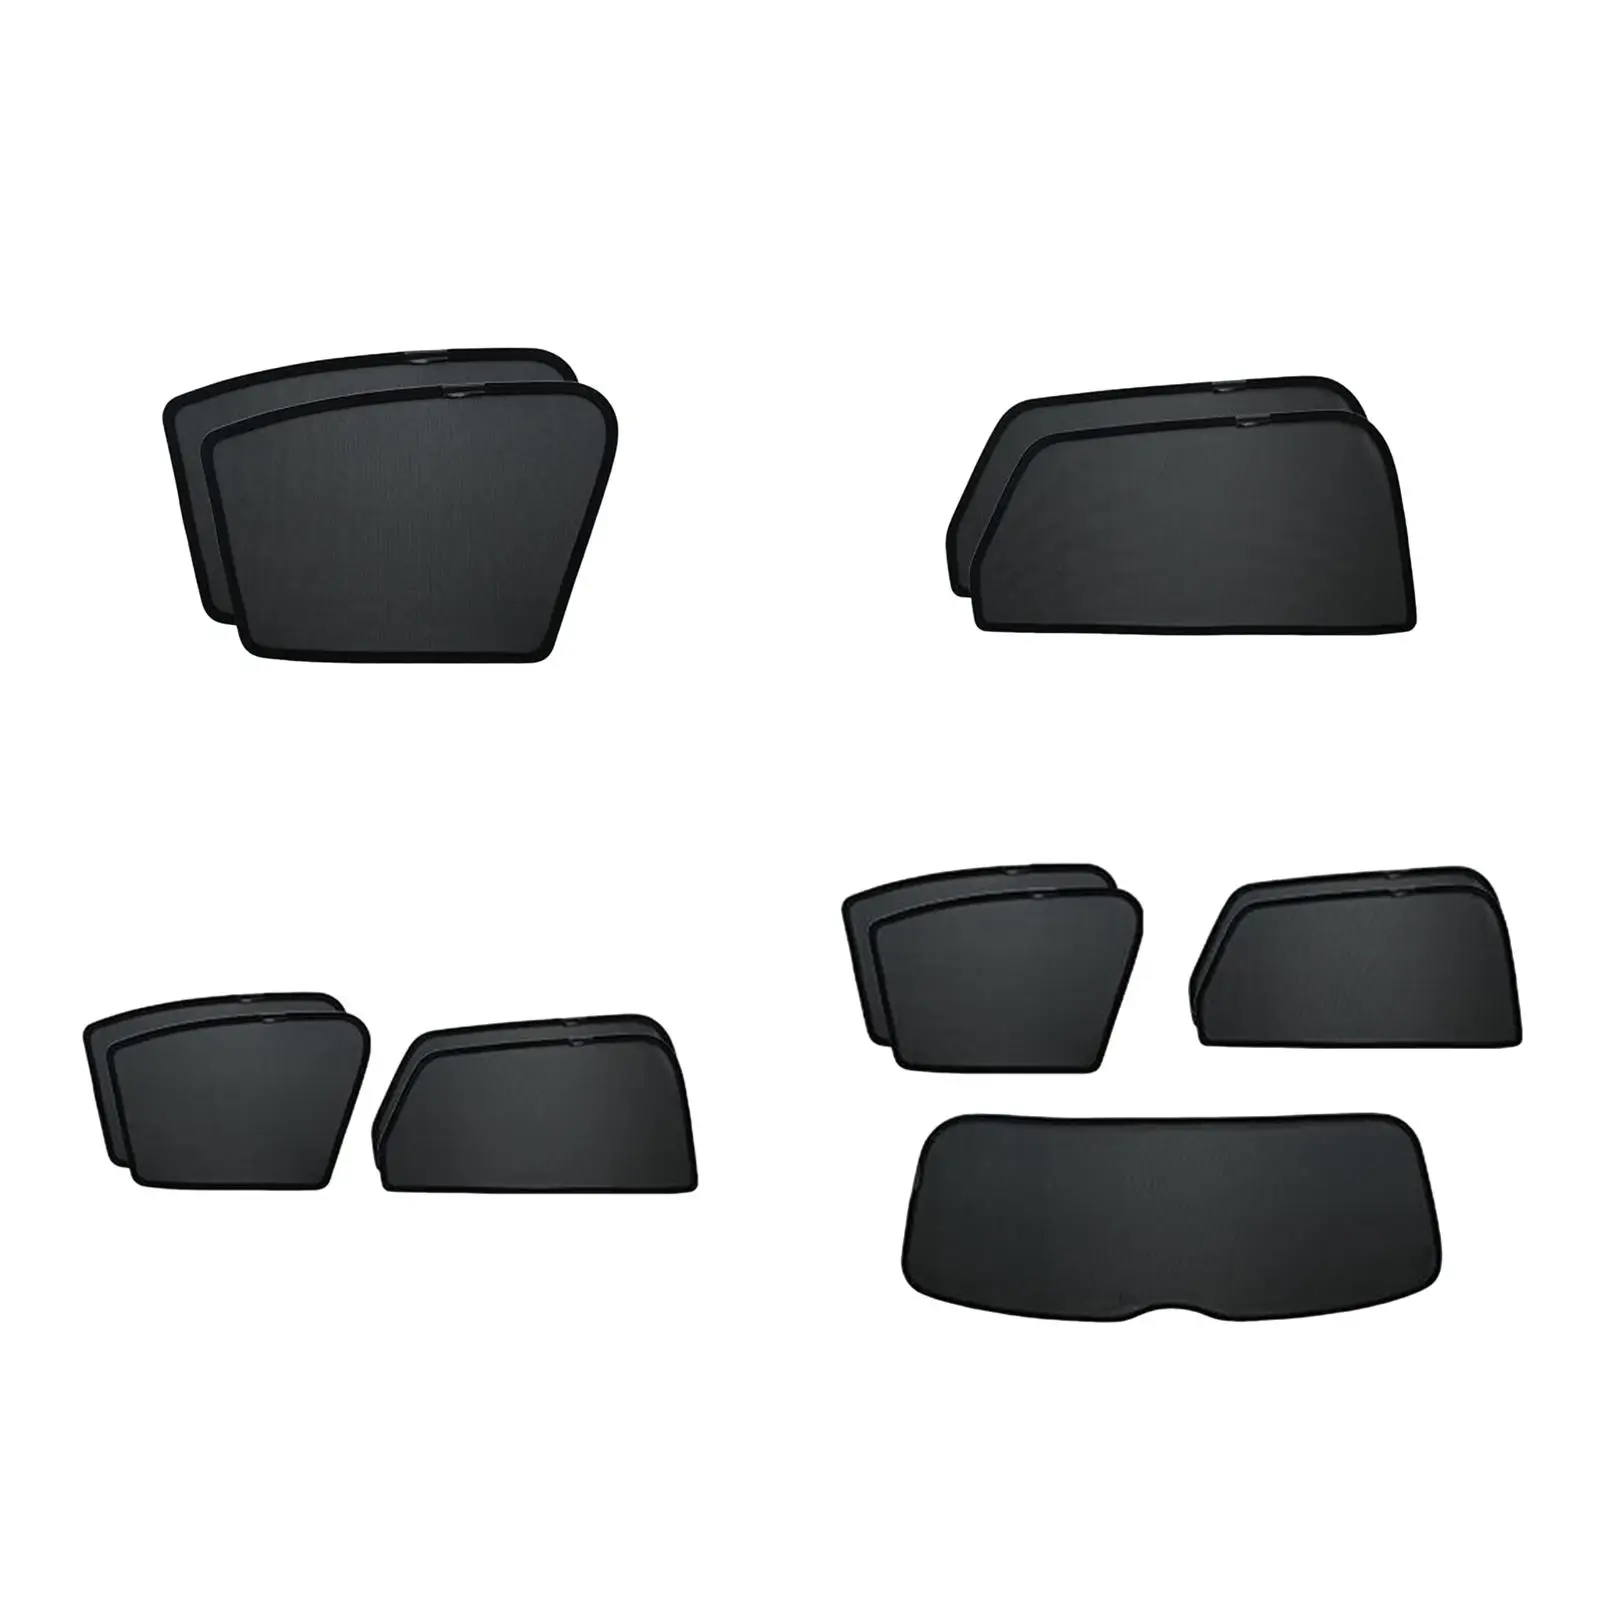 

Car Window Sun Shades Keeps Vehicle Cool Protection Easy to Install Block Light Window Sunshades for Byd Atto 3 Yuan Plus